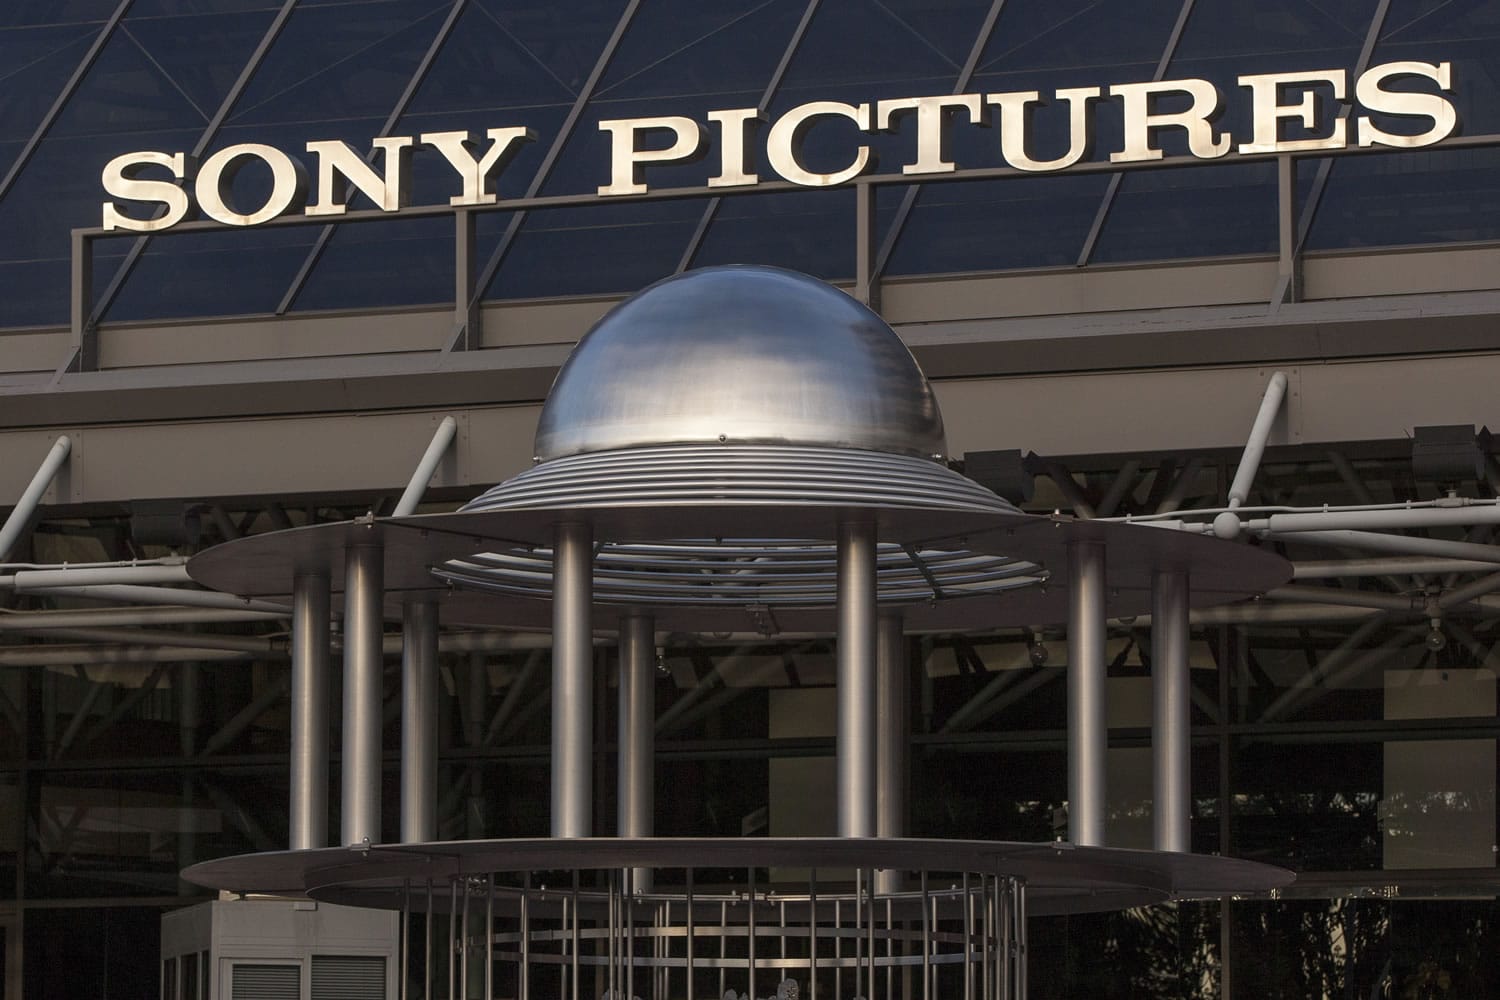 An exterior view of the Sony Pictures Plaza building is seen in Culver City, Calif., on Friday.